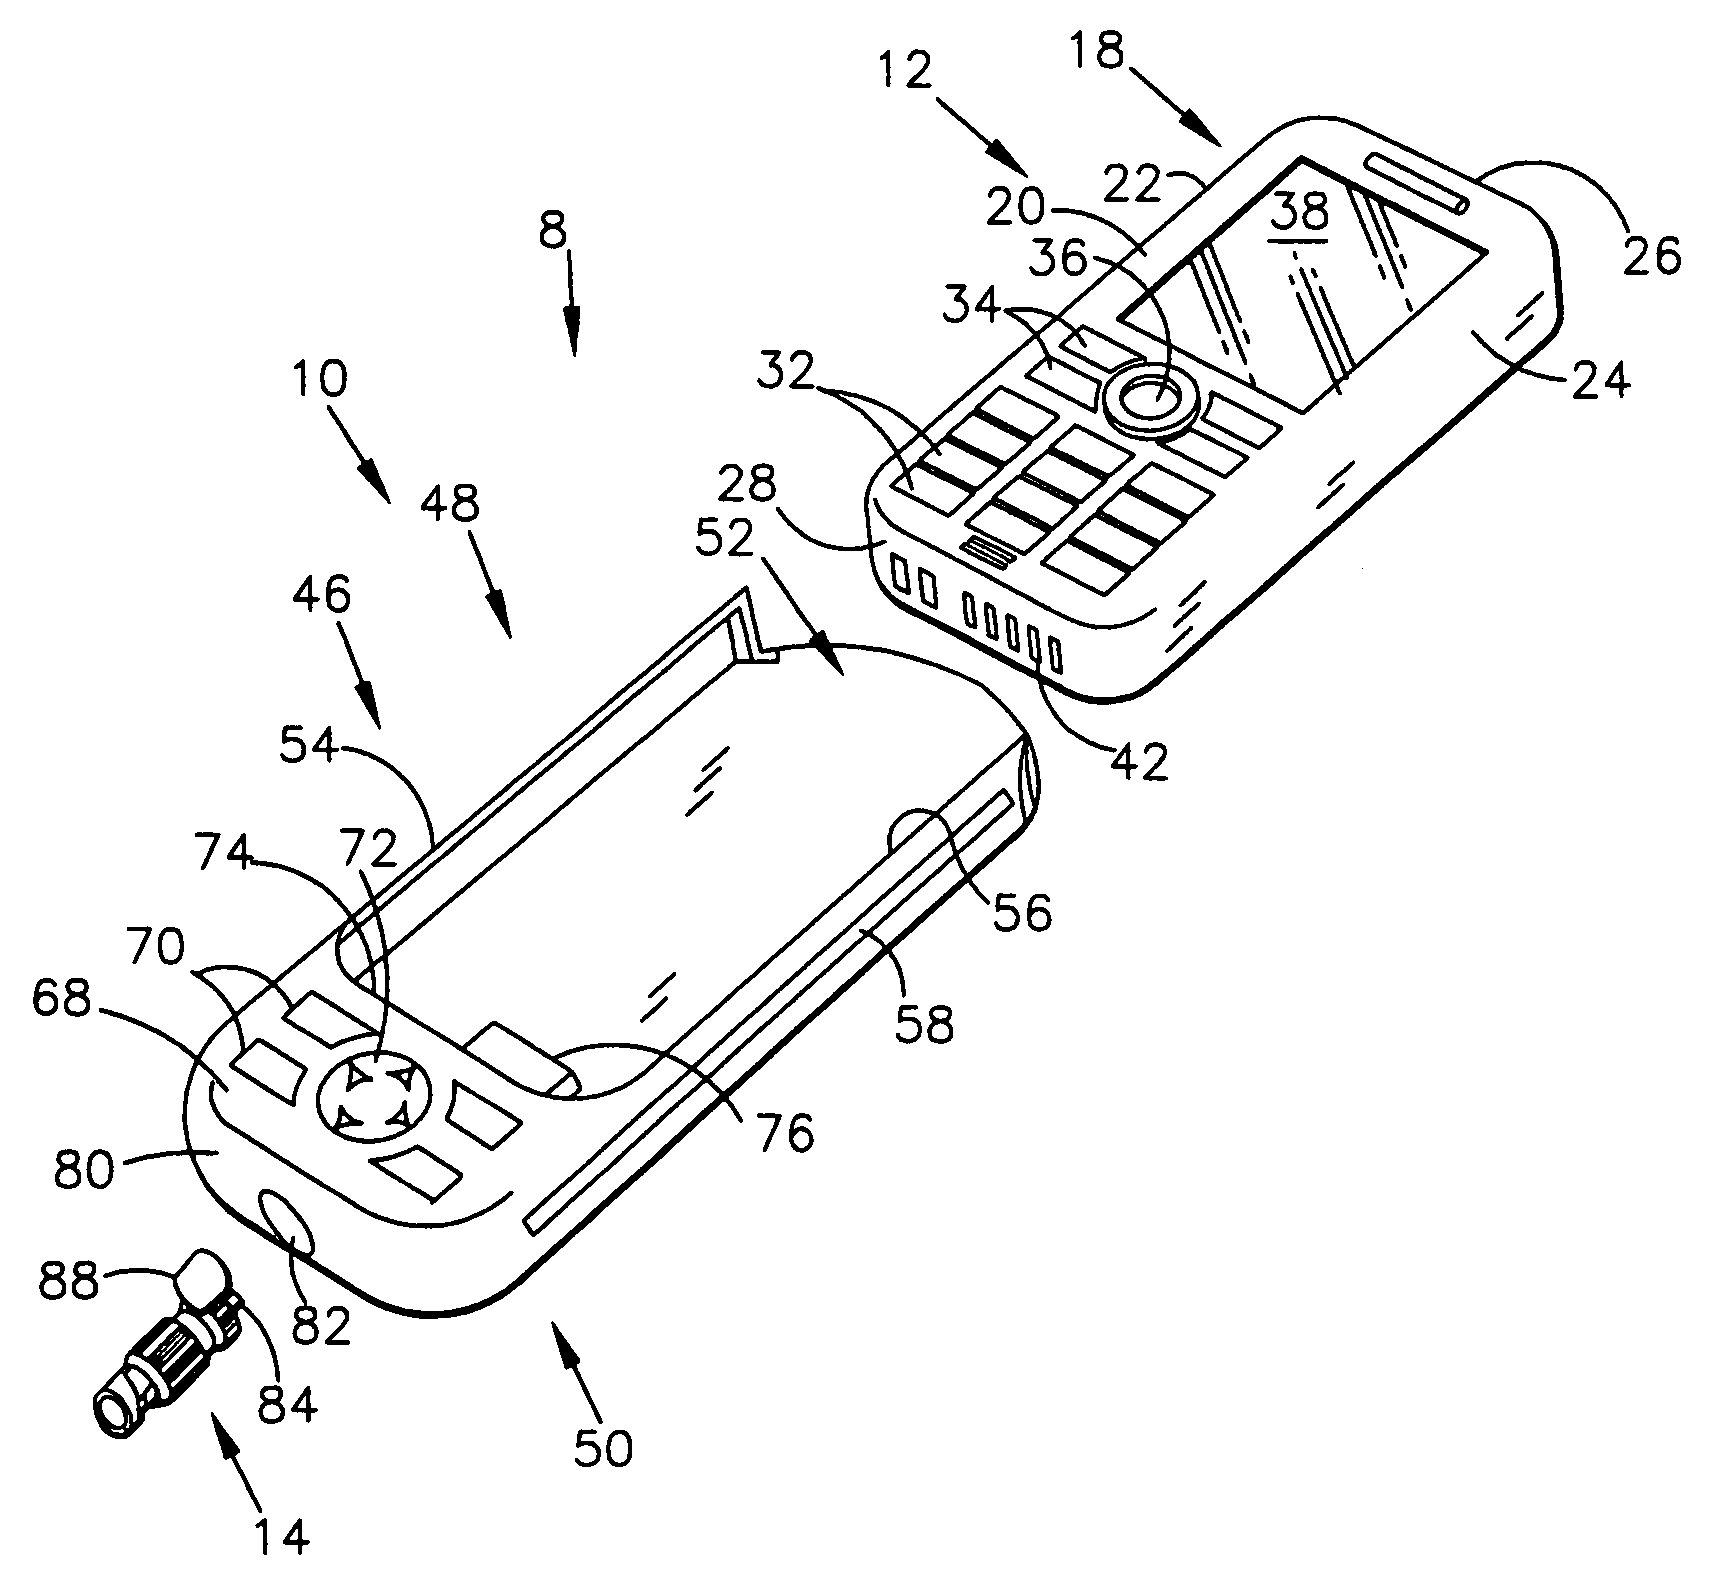 Body fluid testing component for simultaneous analyte detection